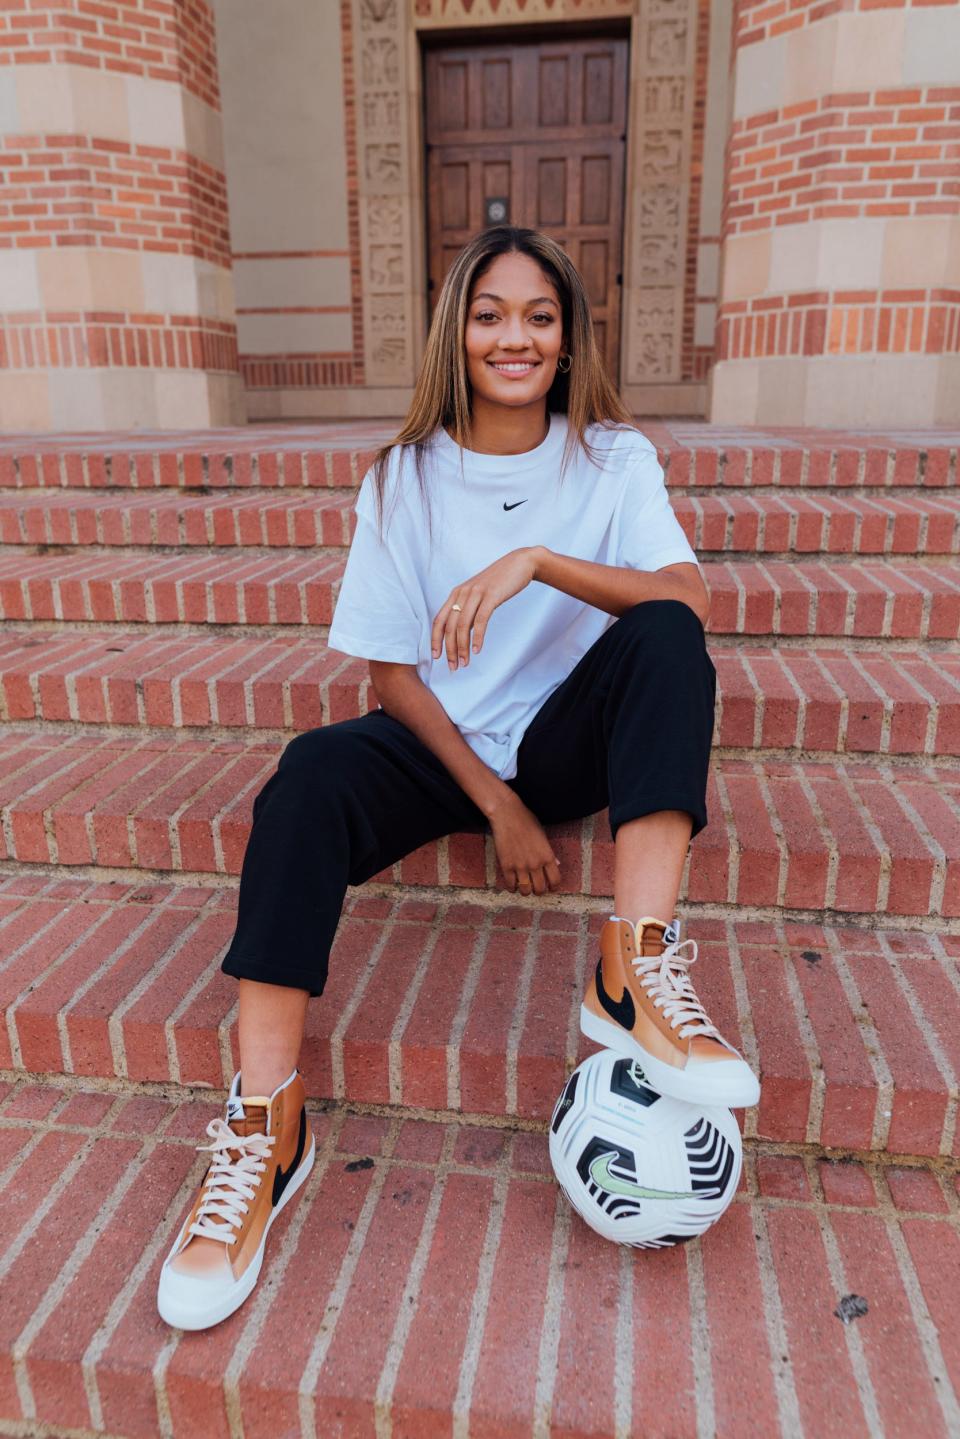 UCLA's Reilyn Turner becomes the first student-athlete to sign with Nike in name, image and likeness sponsorship deal.